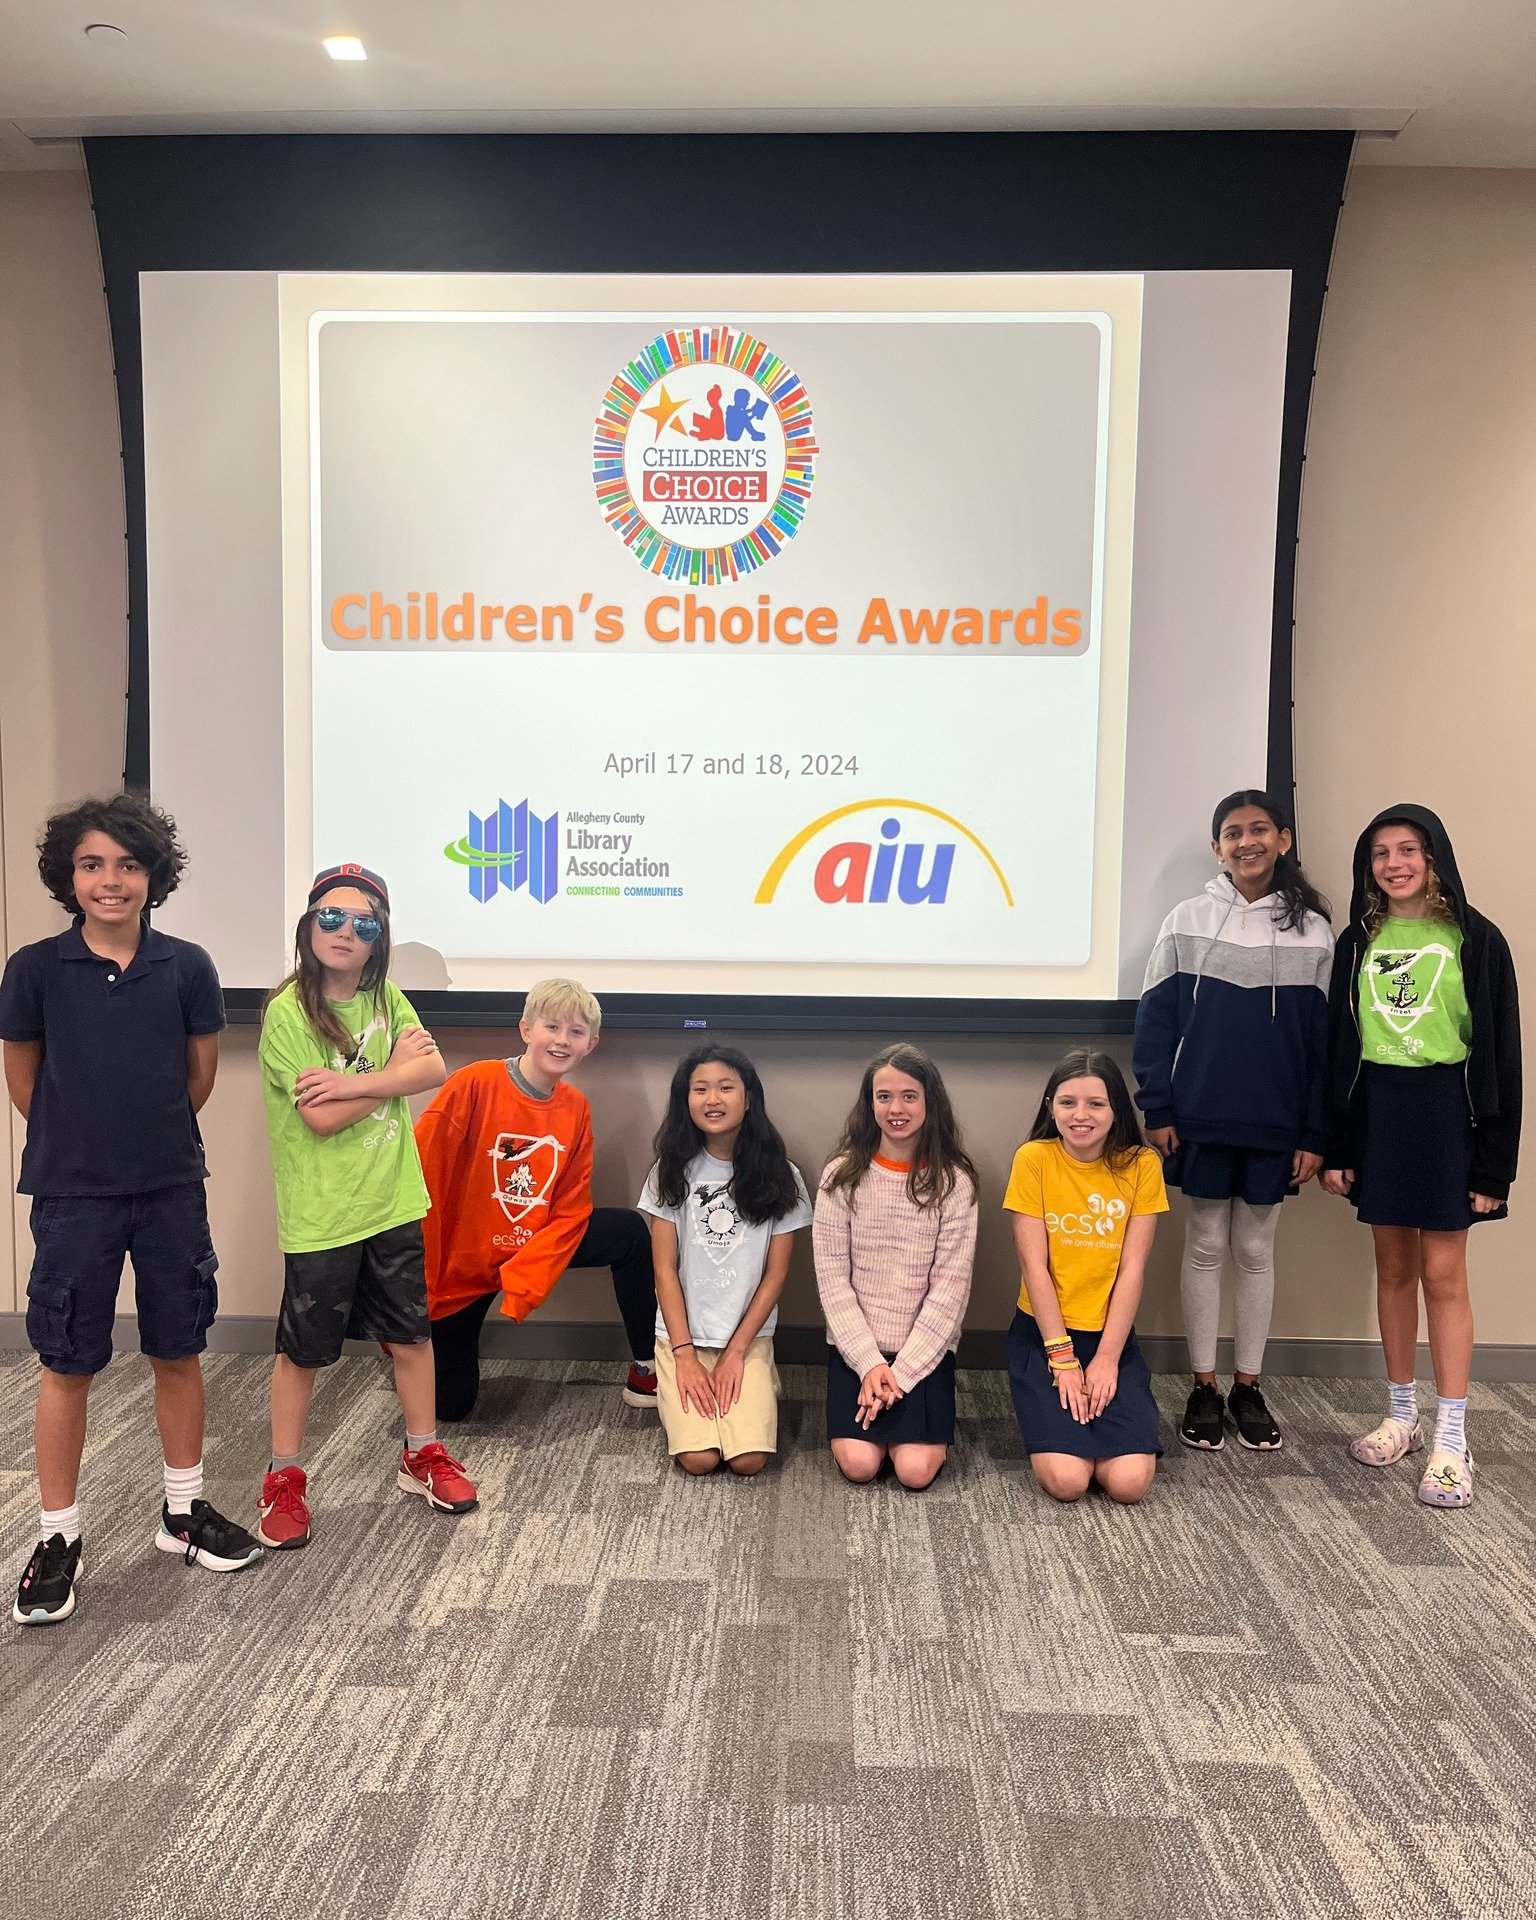 It's World Book Day! 📚 Last week, these 5th graders attended the Children&rsquo;s Choice Awards. Highlights included a keynote and Q&amp;A with author Ann Burt, a performance by Josh and Gab, and a Battle of the Books. #GrowingCitizens